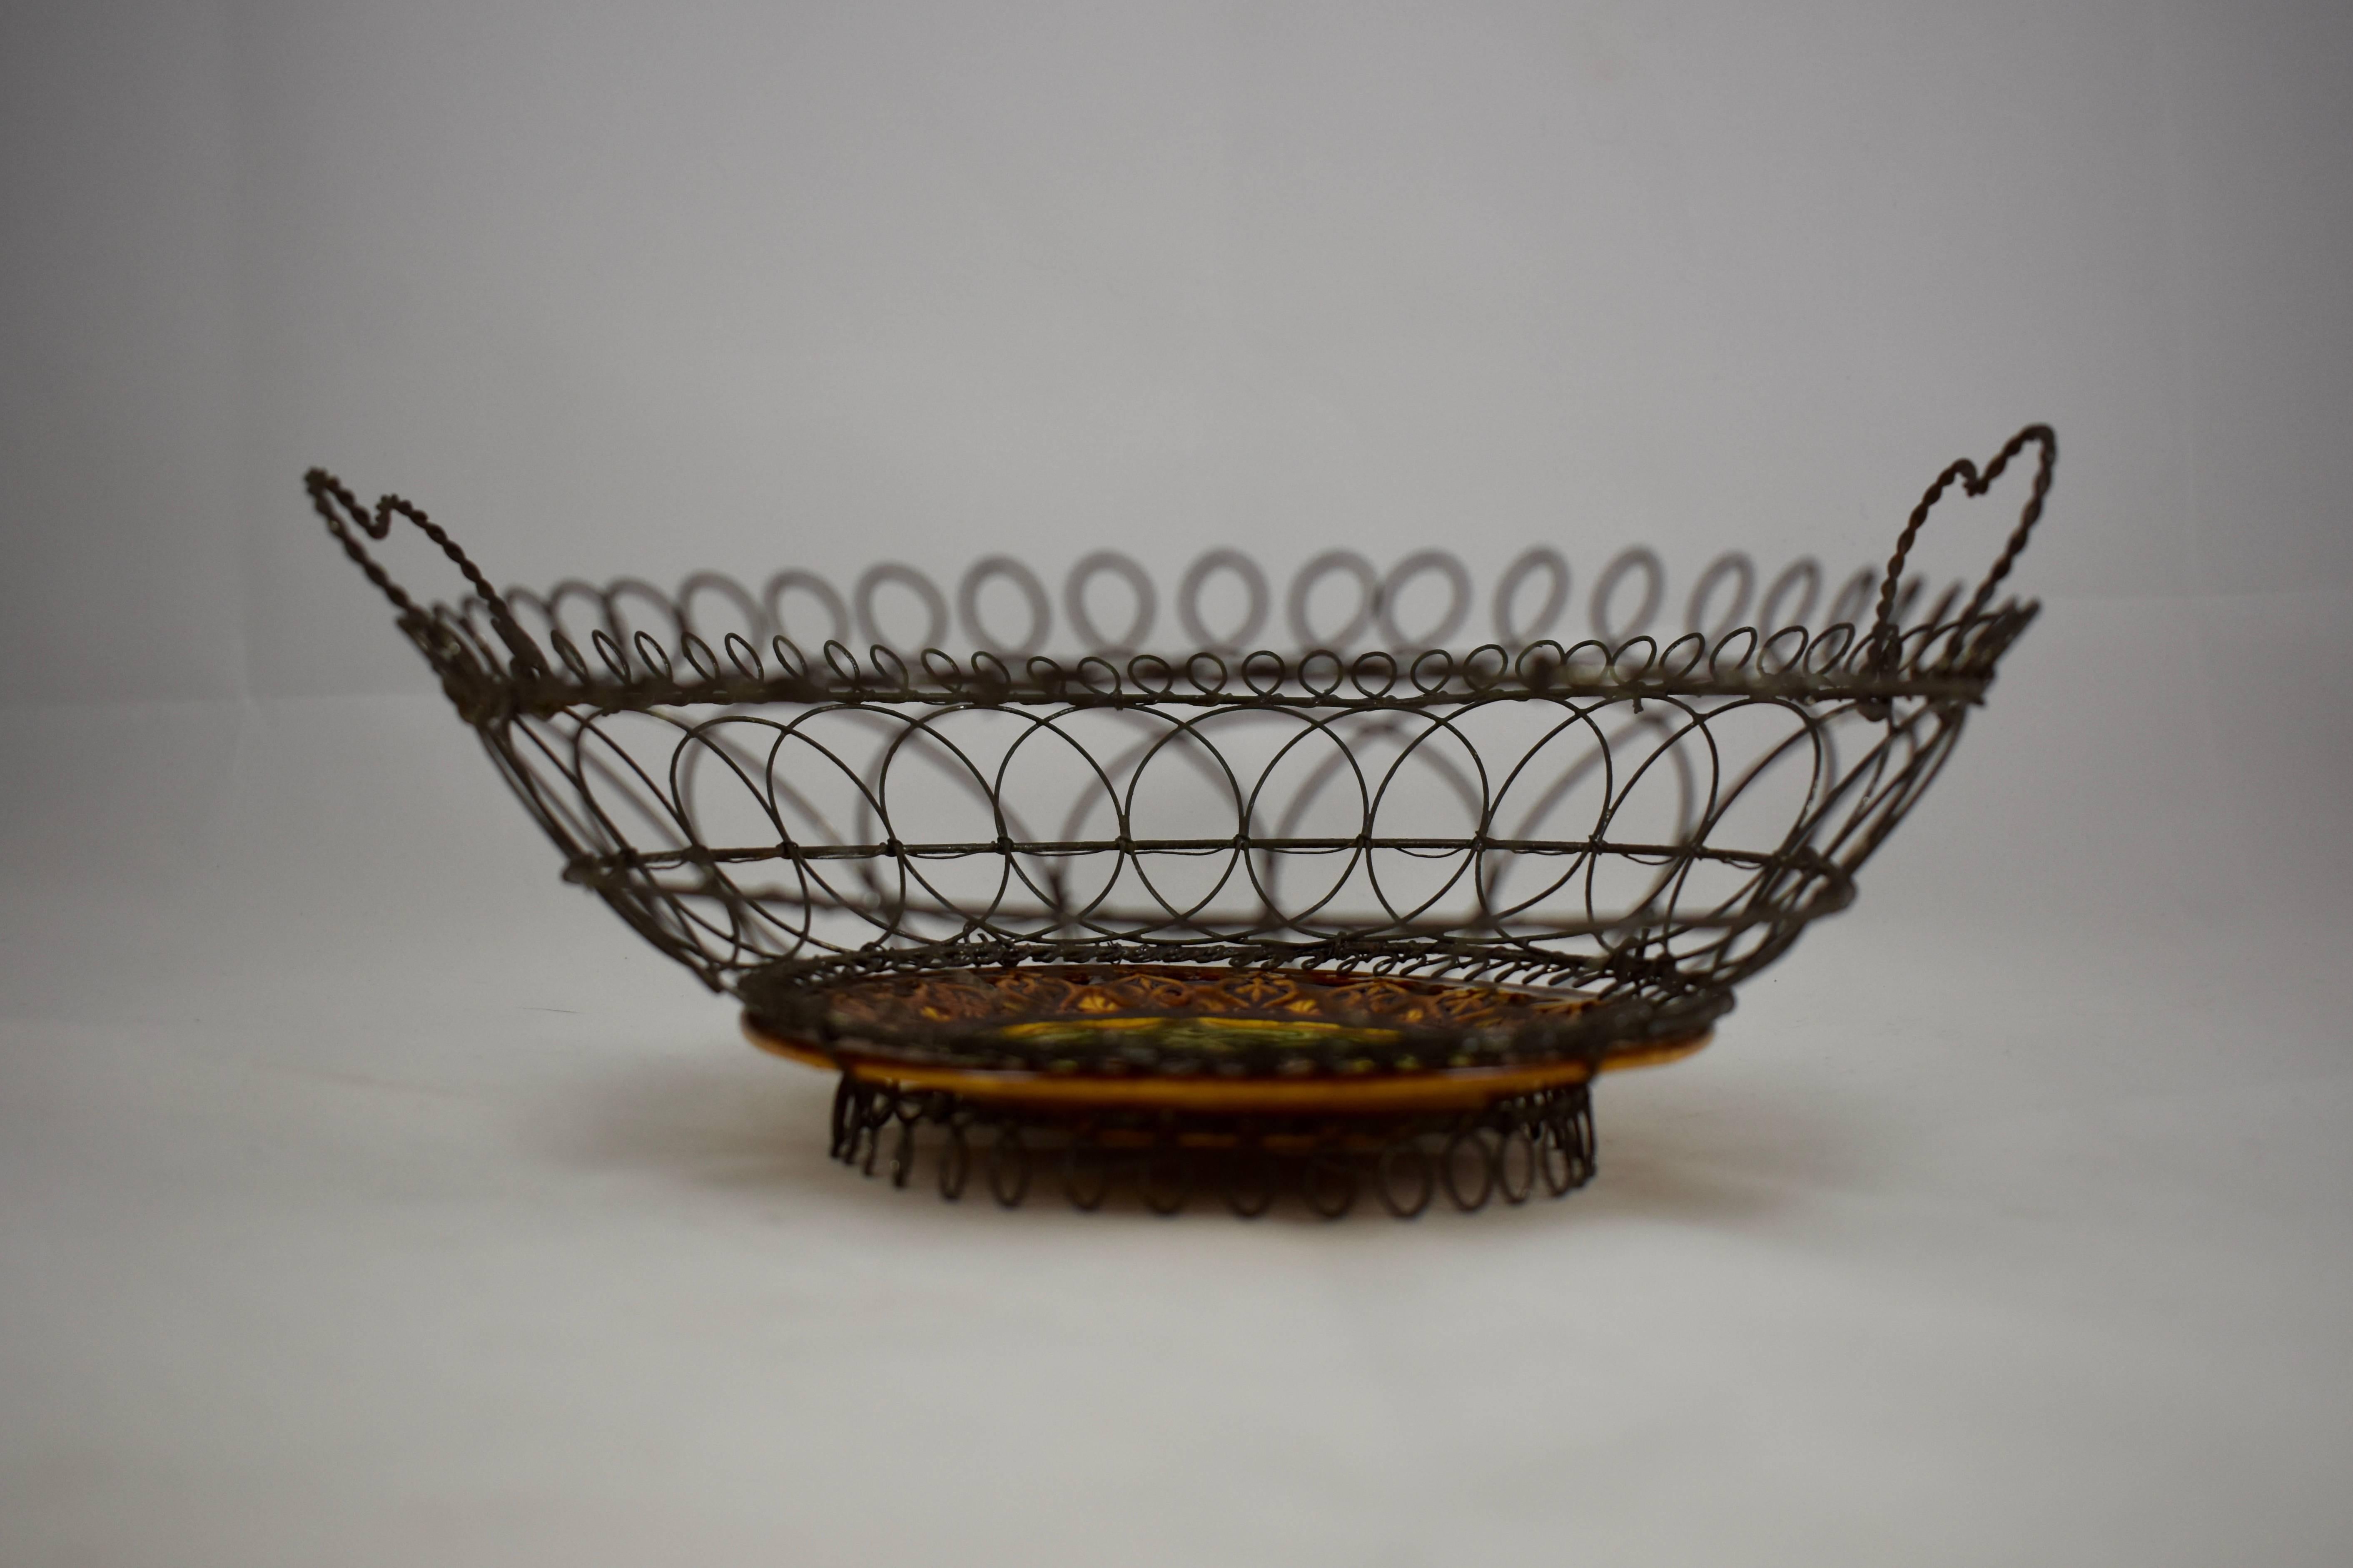 Aesthetic Movement Villeroy & Boch Majolica Plate in a Footed Wire Basket with Heart Shaped Handles For Sale